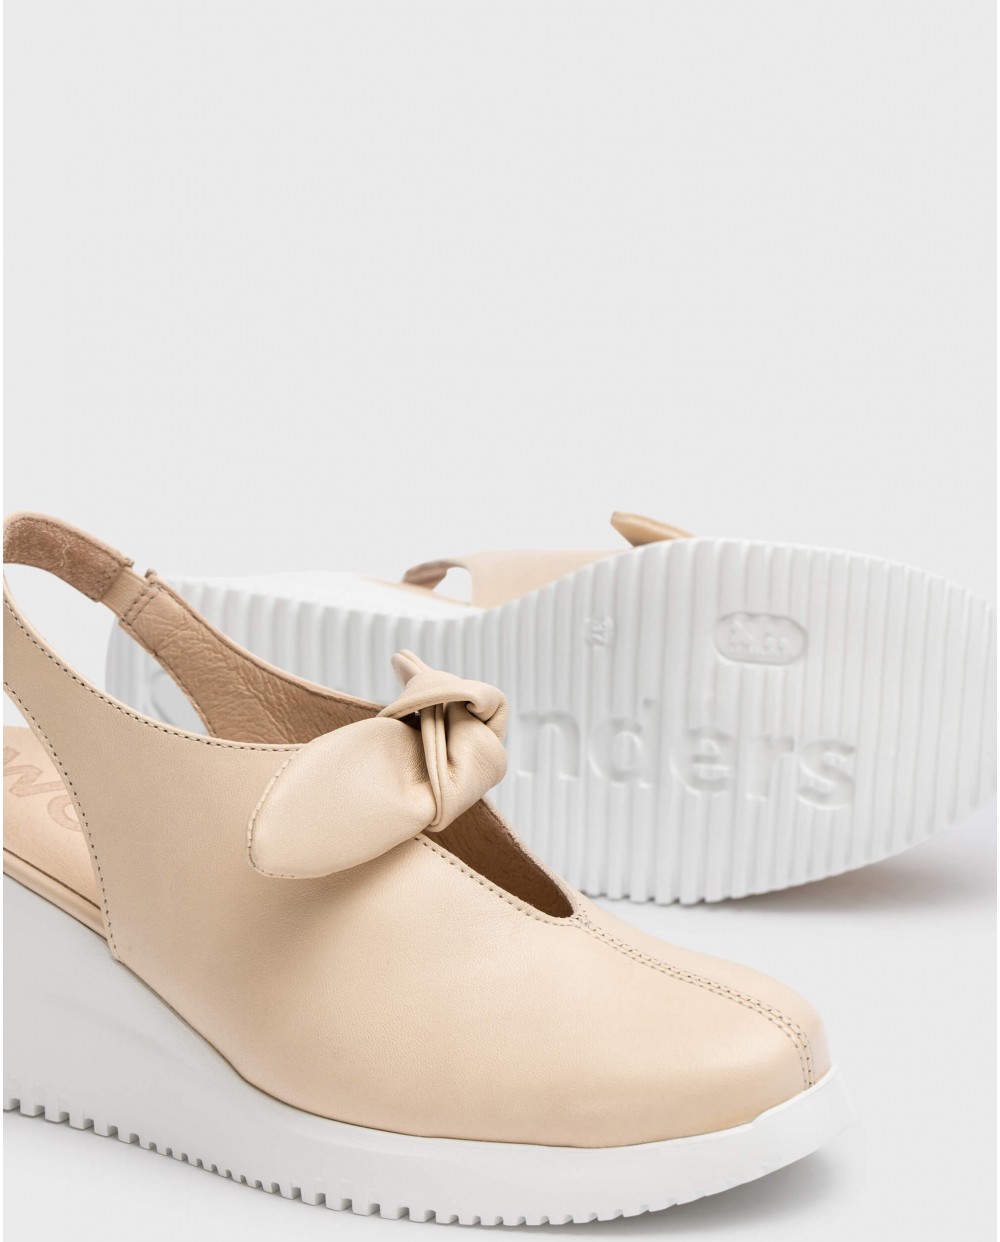 Wonders-Outlet-Zapato ORLEANS beige